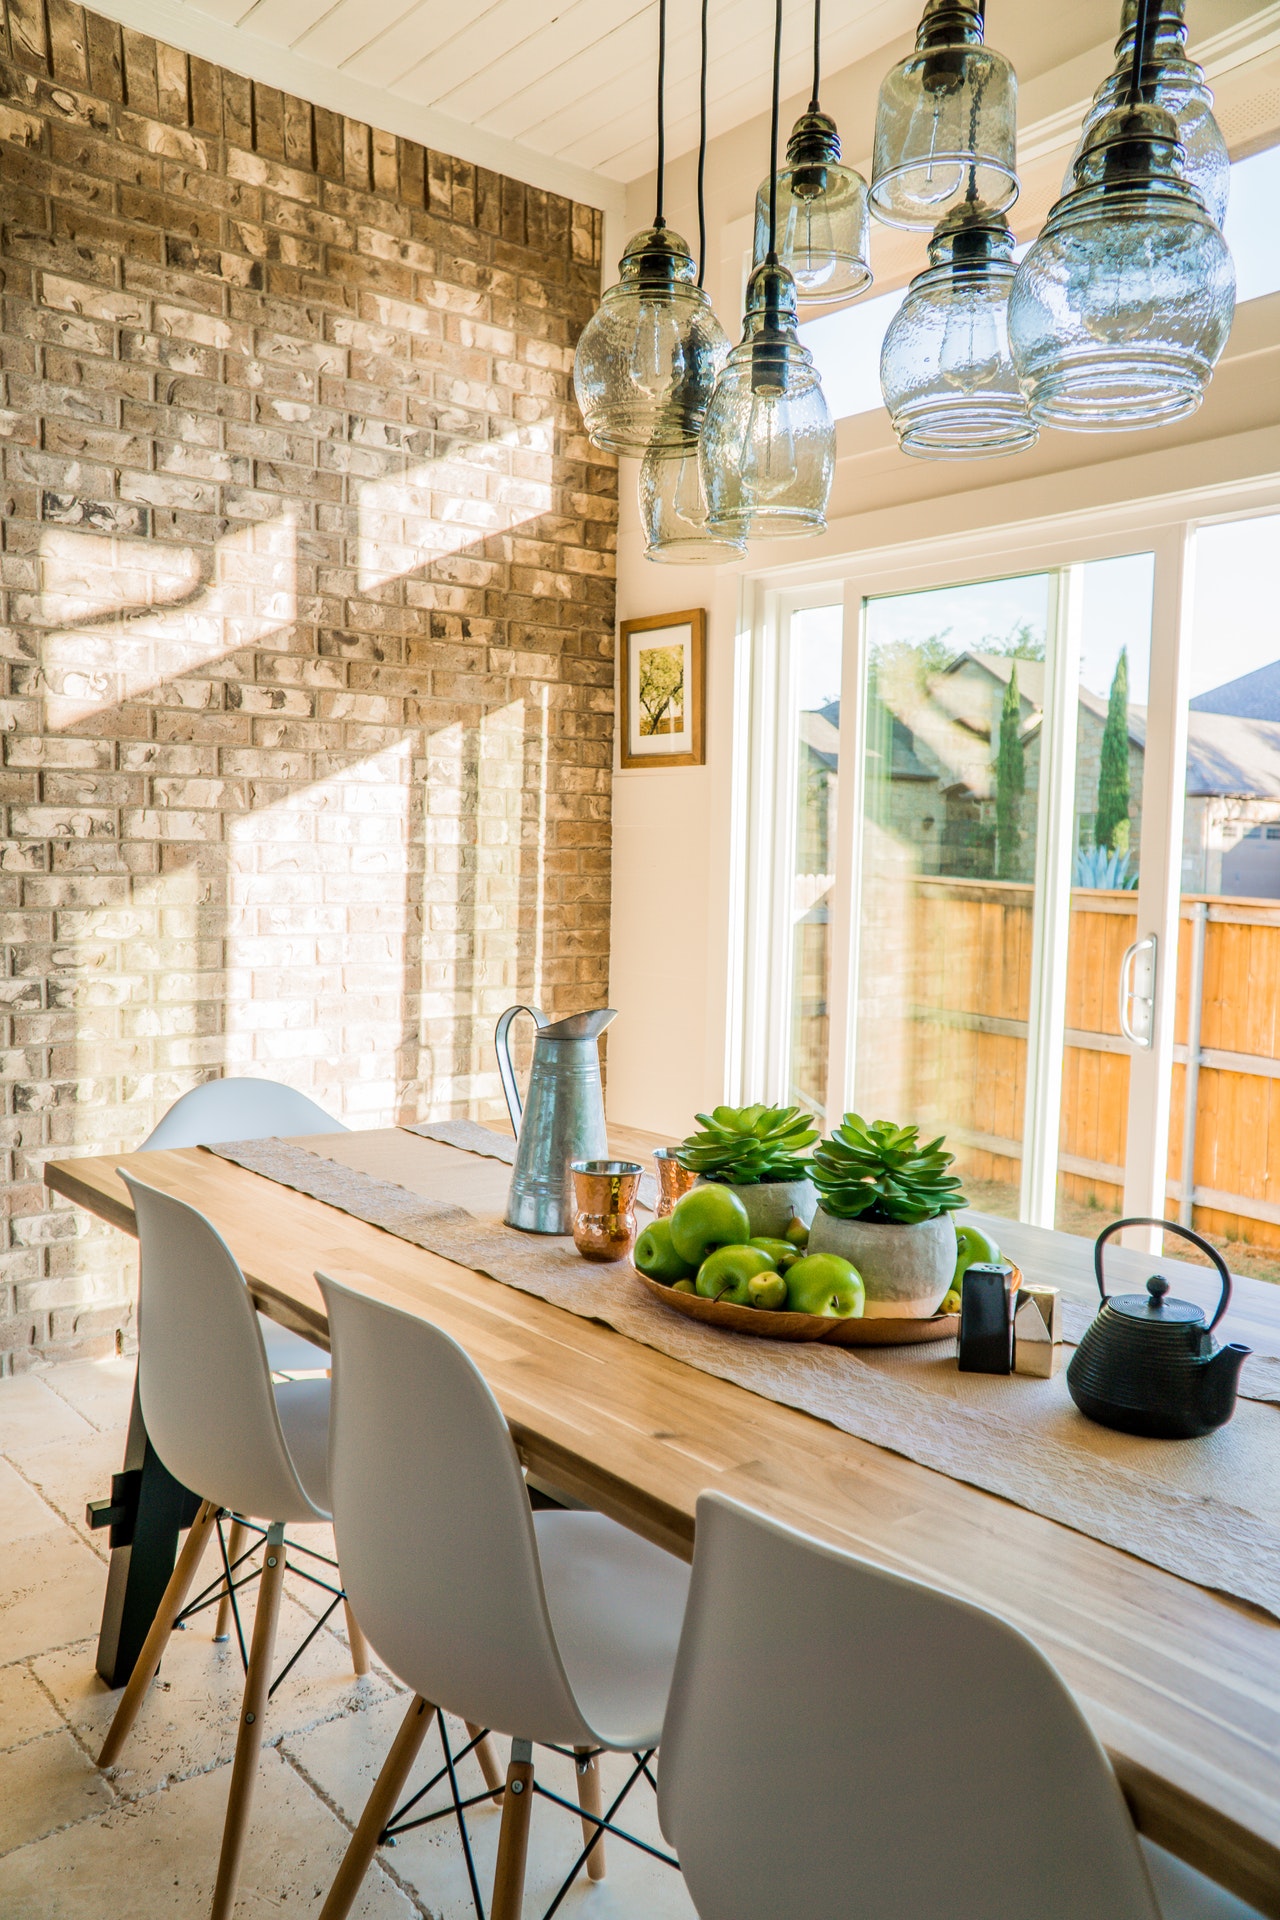 6 Renovation Tips For Your Home Remodel 